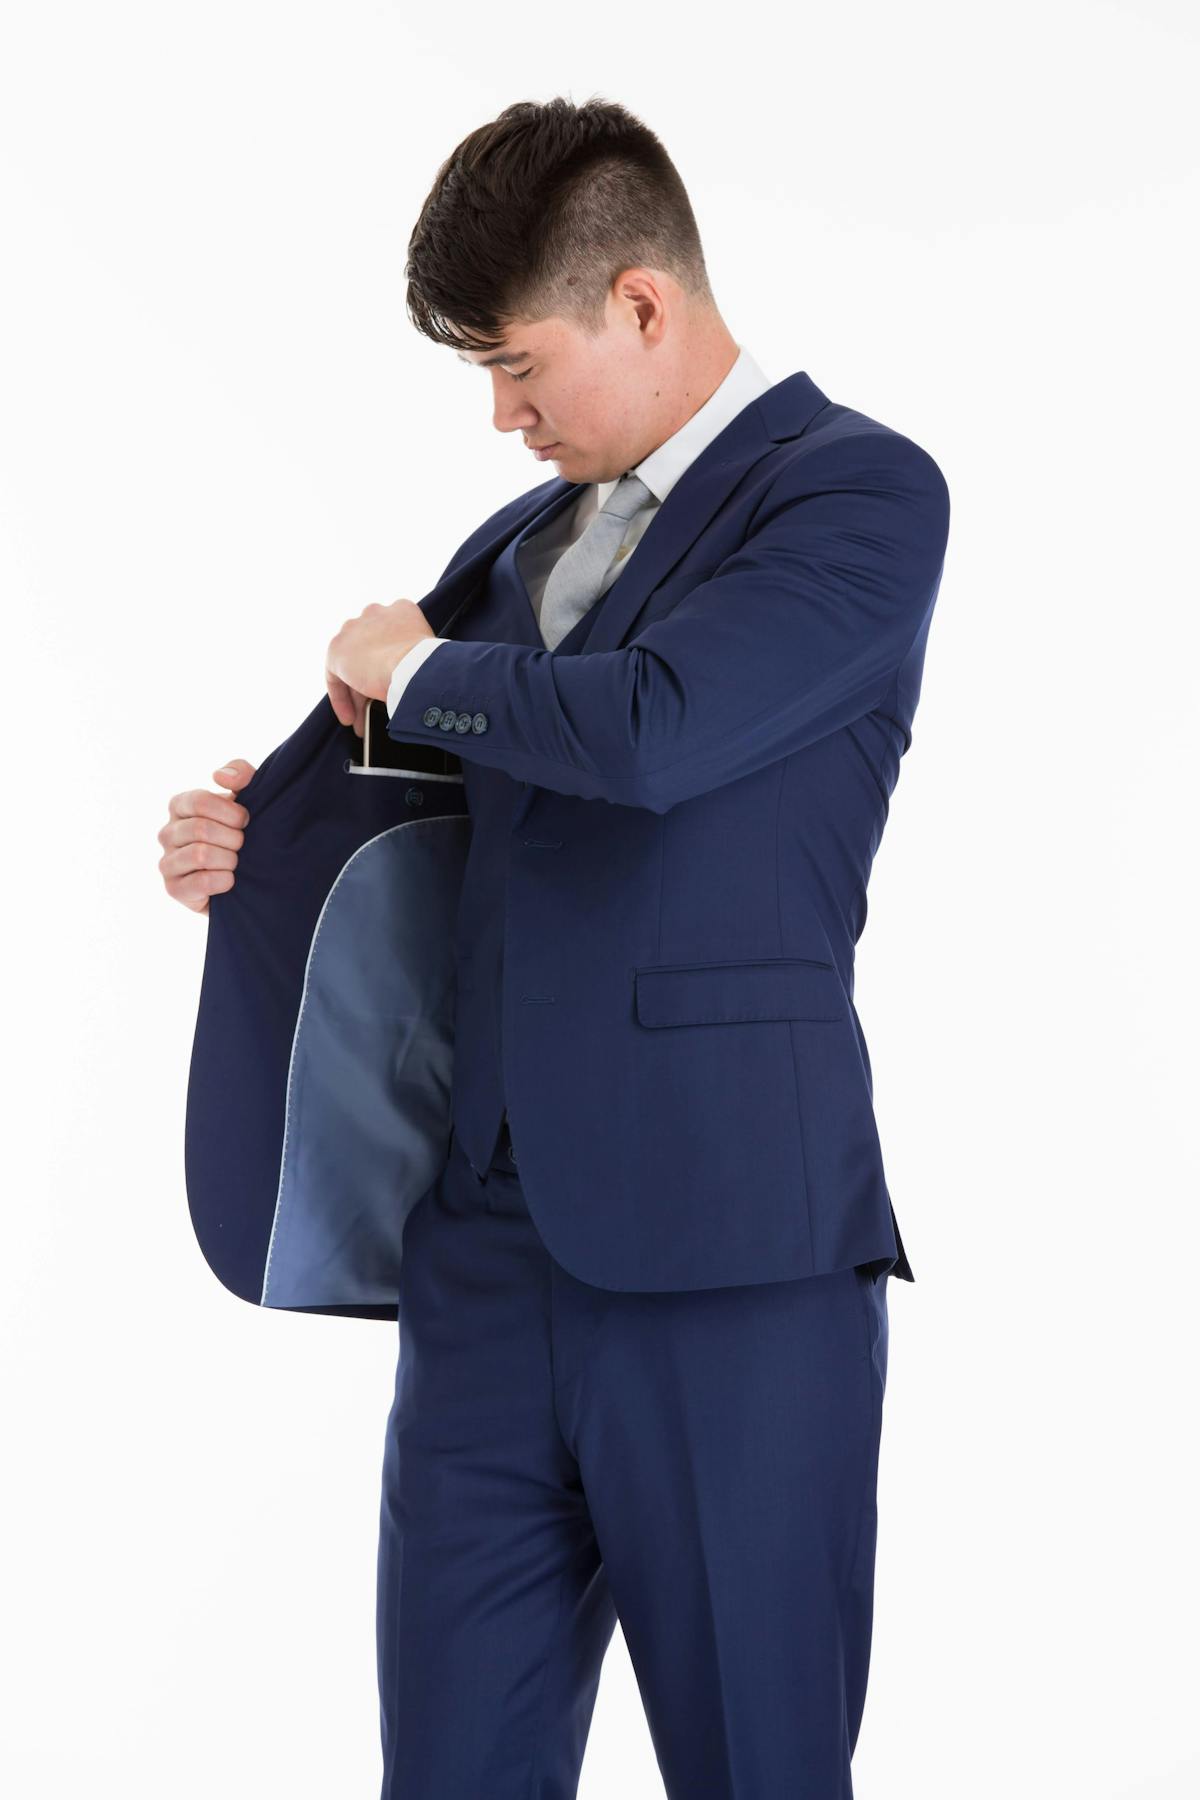 How should I carry my phone, wallet, and keys in my suit pockets?